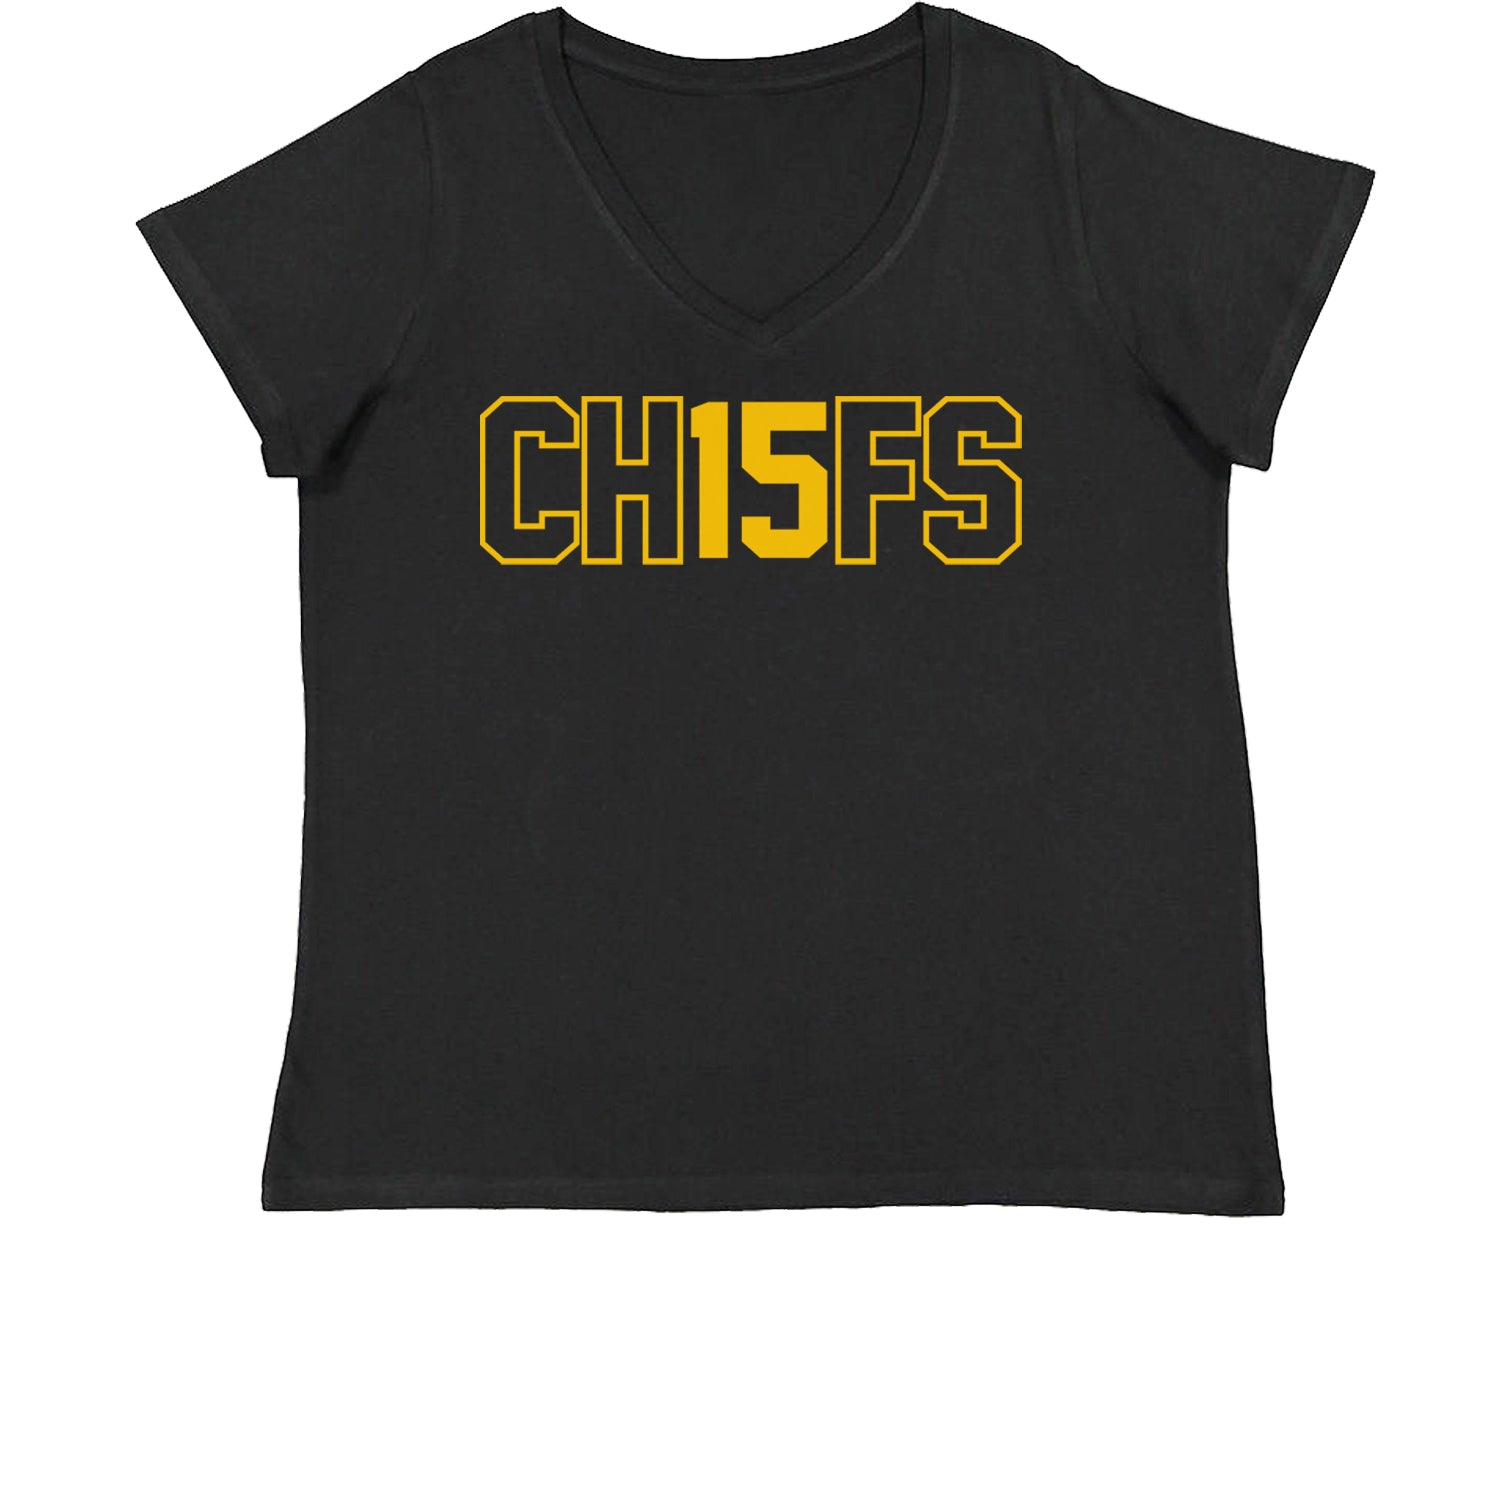 Ch15fs Chief 15 Shirt Womens Plus Size V-Neck T-shirt ass, big, burrowhead, game, kelce, know, moutha, my, nd, patrick, role, shut, sports, your by Expression Tees